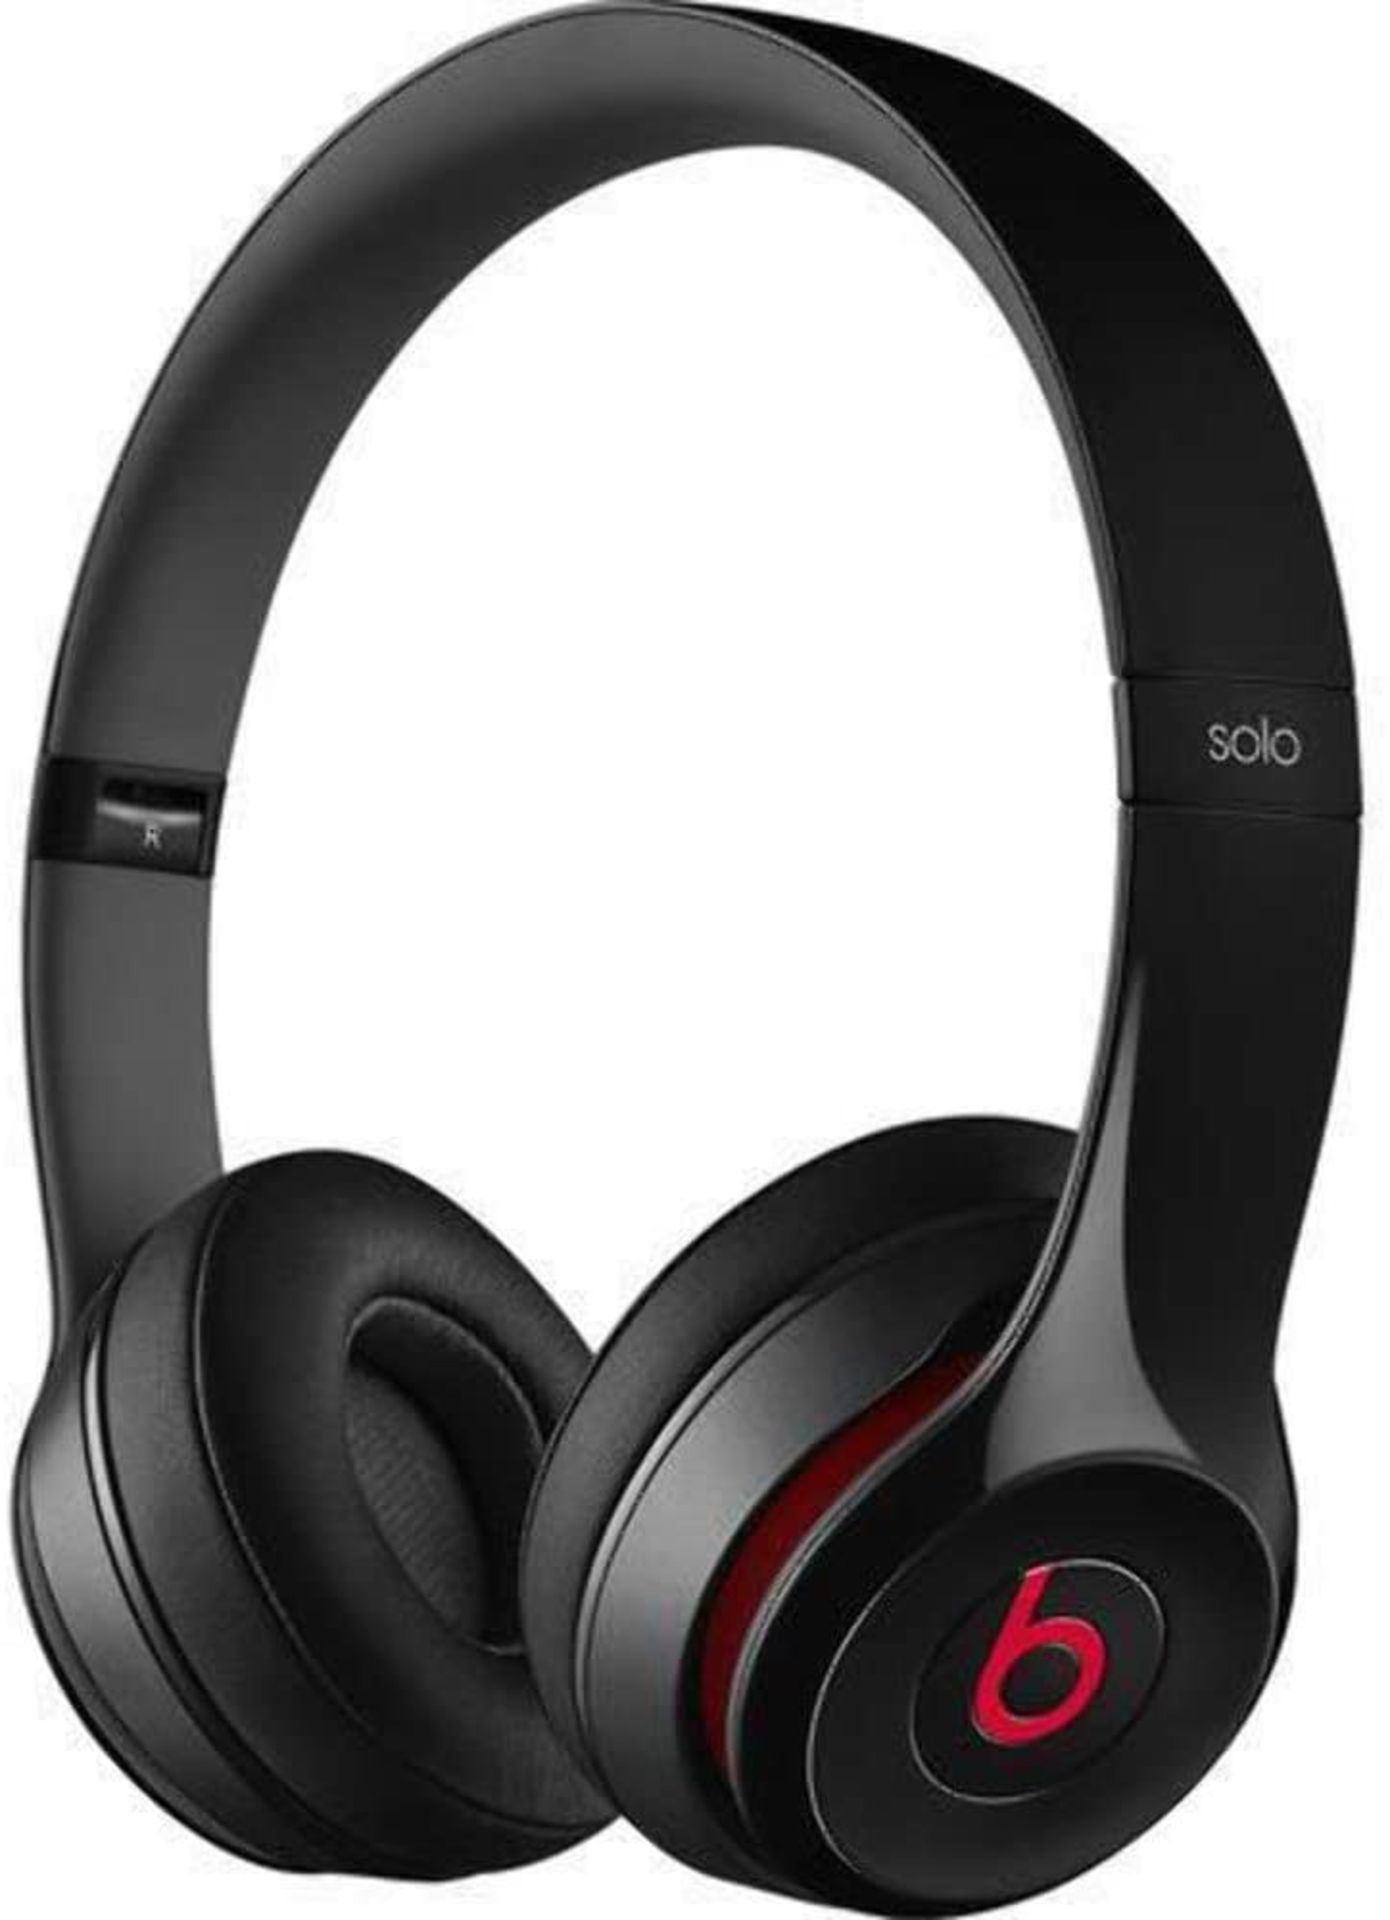 (66) 1 x Grade B - Beats by Dr. Dre Solo2 Wireless On-Ear Headphones - Black. Pair and play wit...